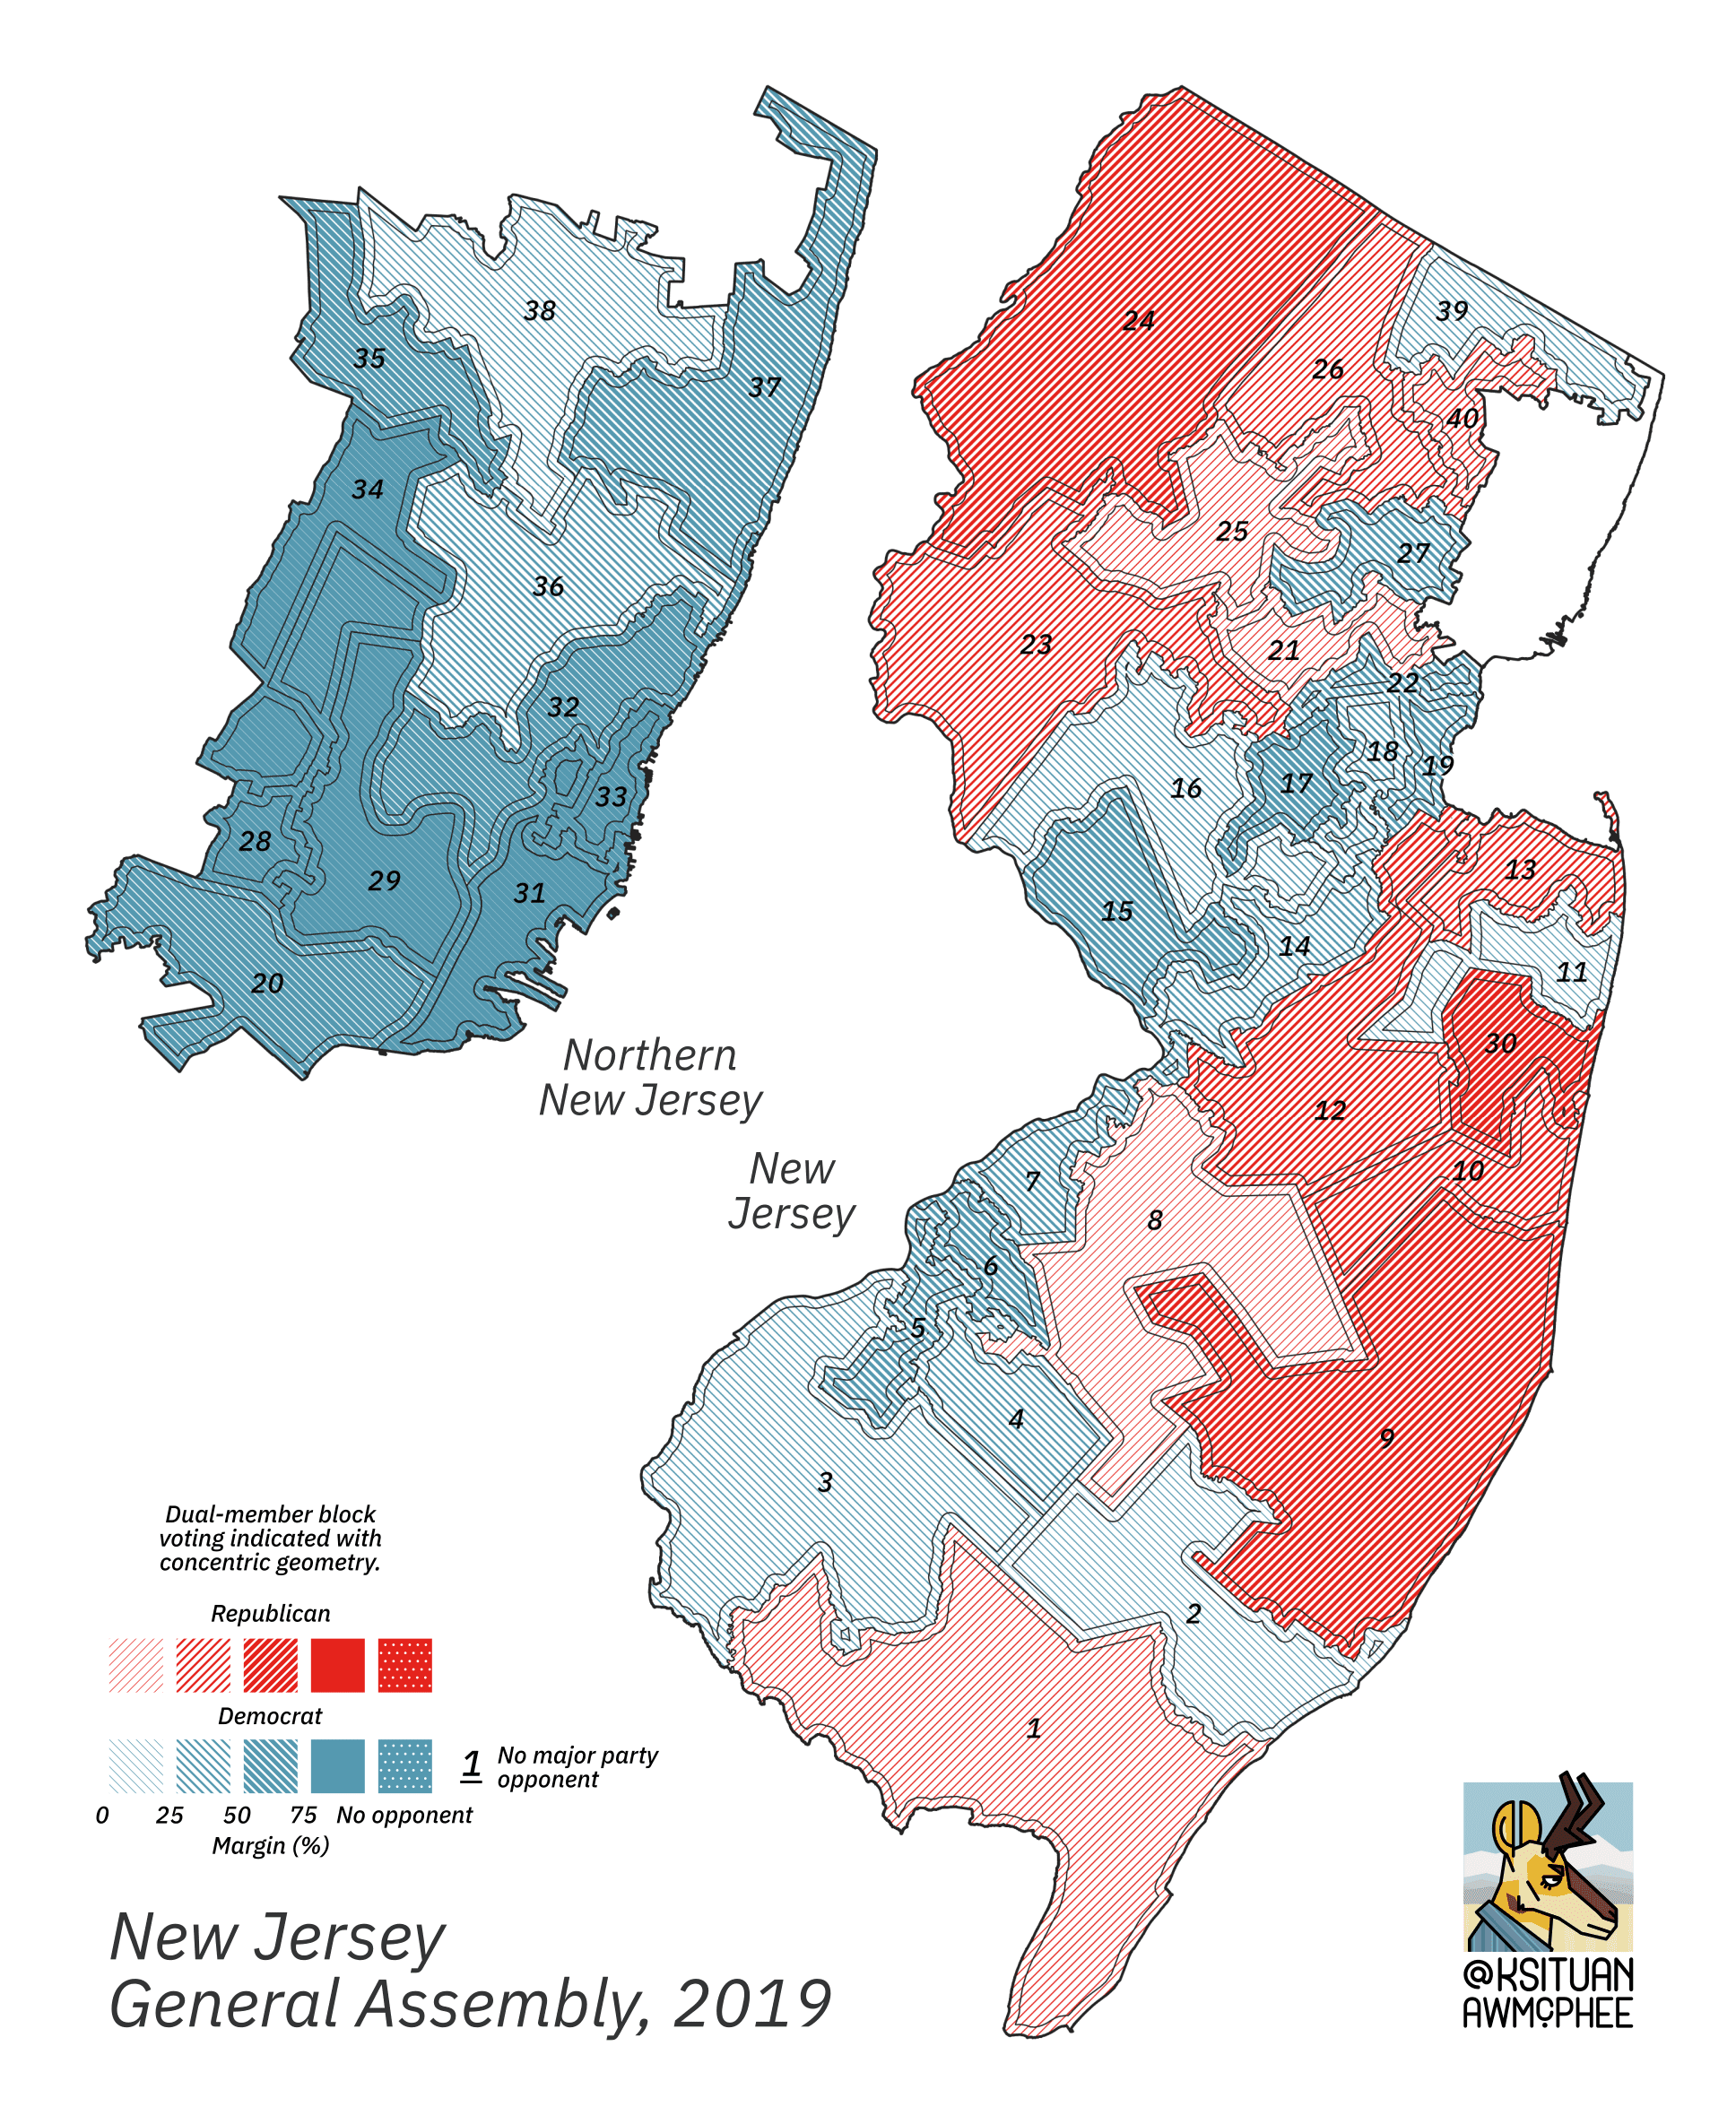 A political map of New Jersey.